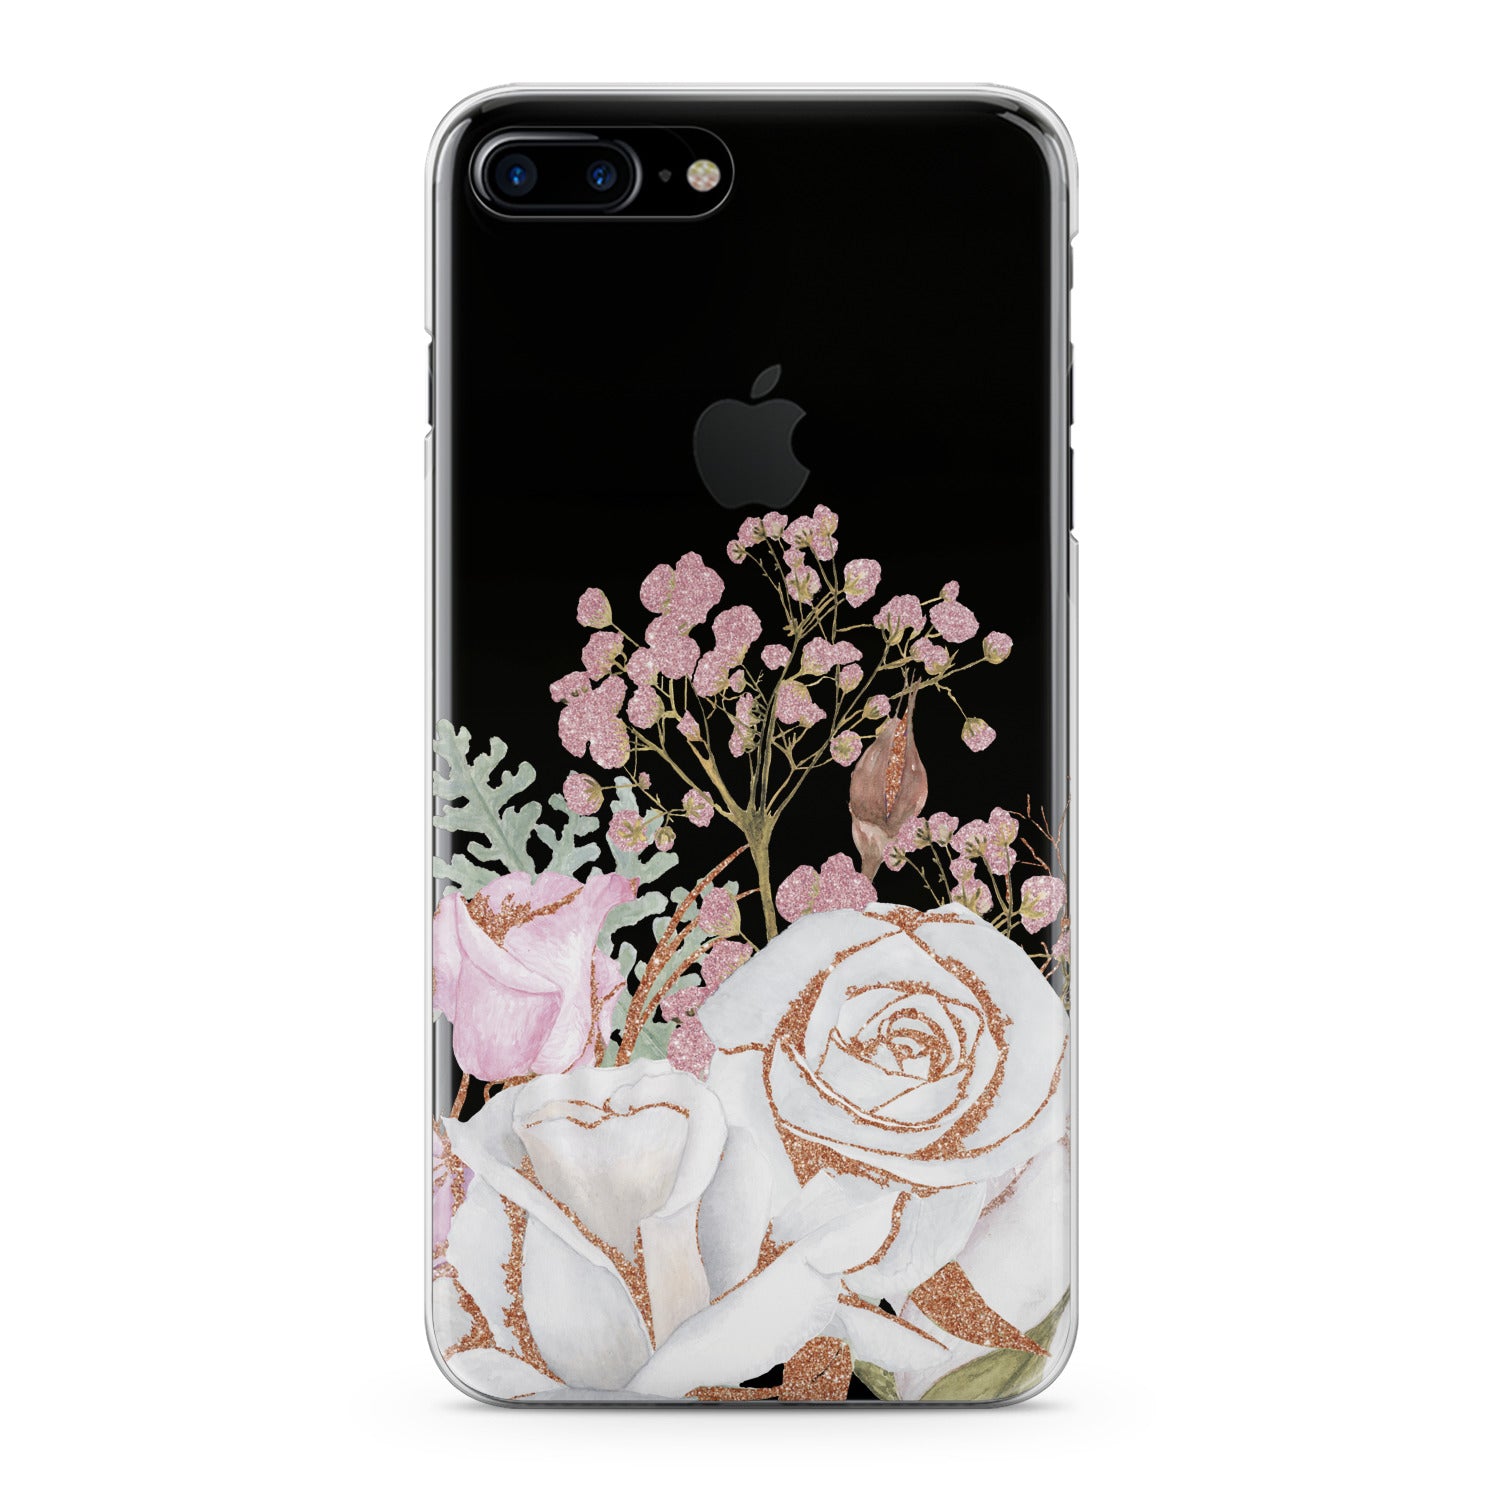 Lex Altern White Rose Pattern Phone Case for your iPhone & Android phone.